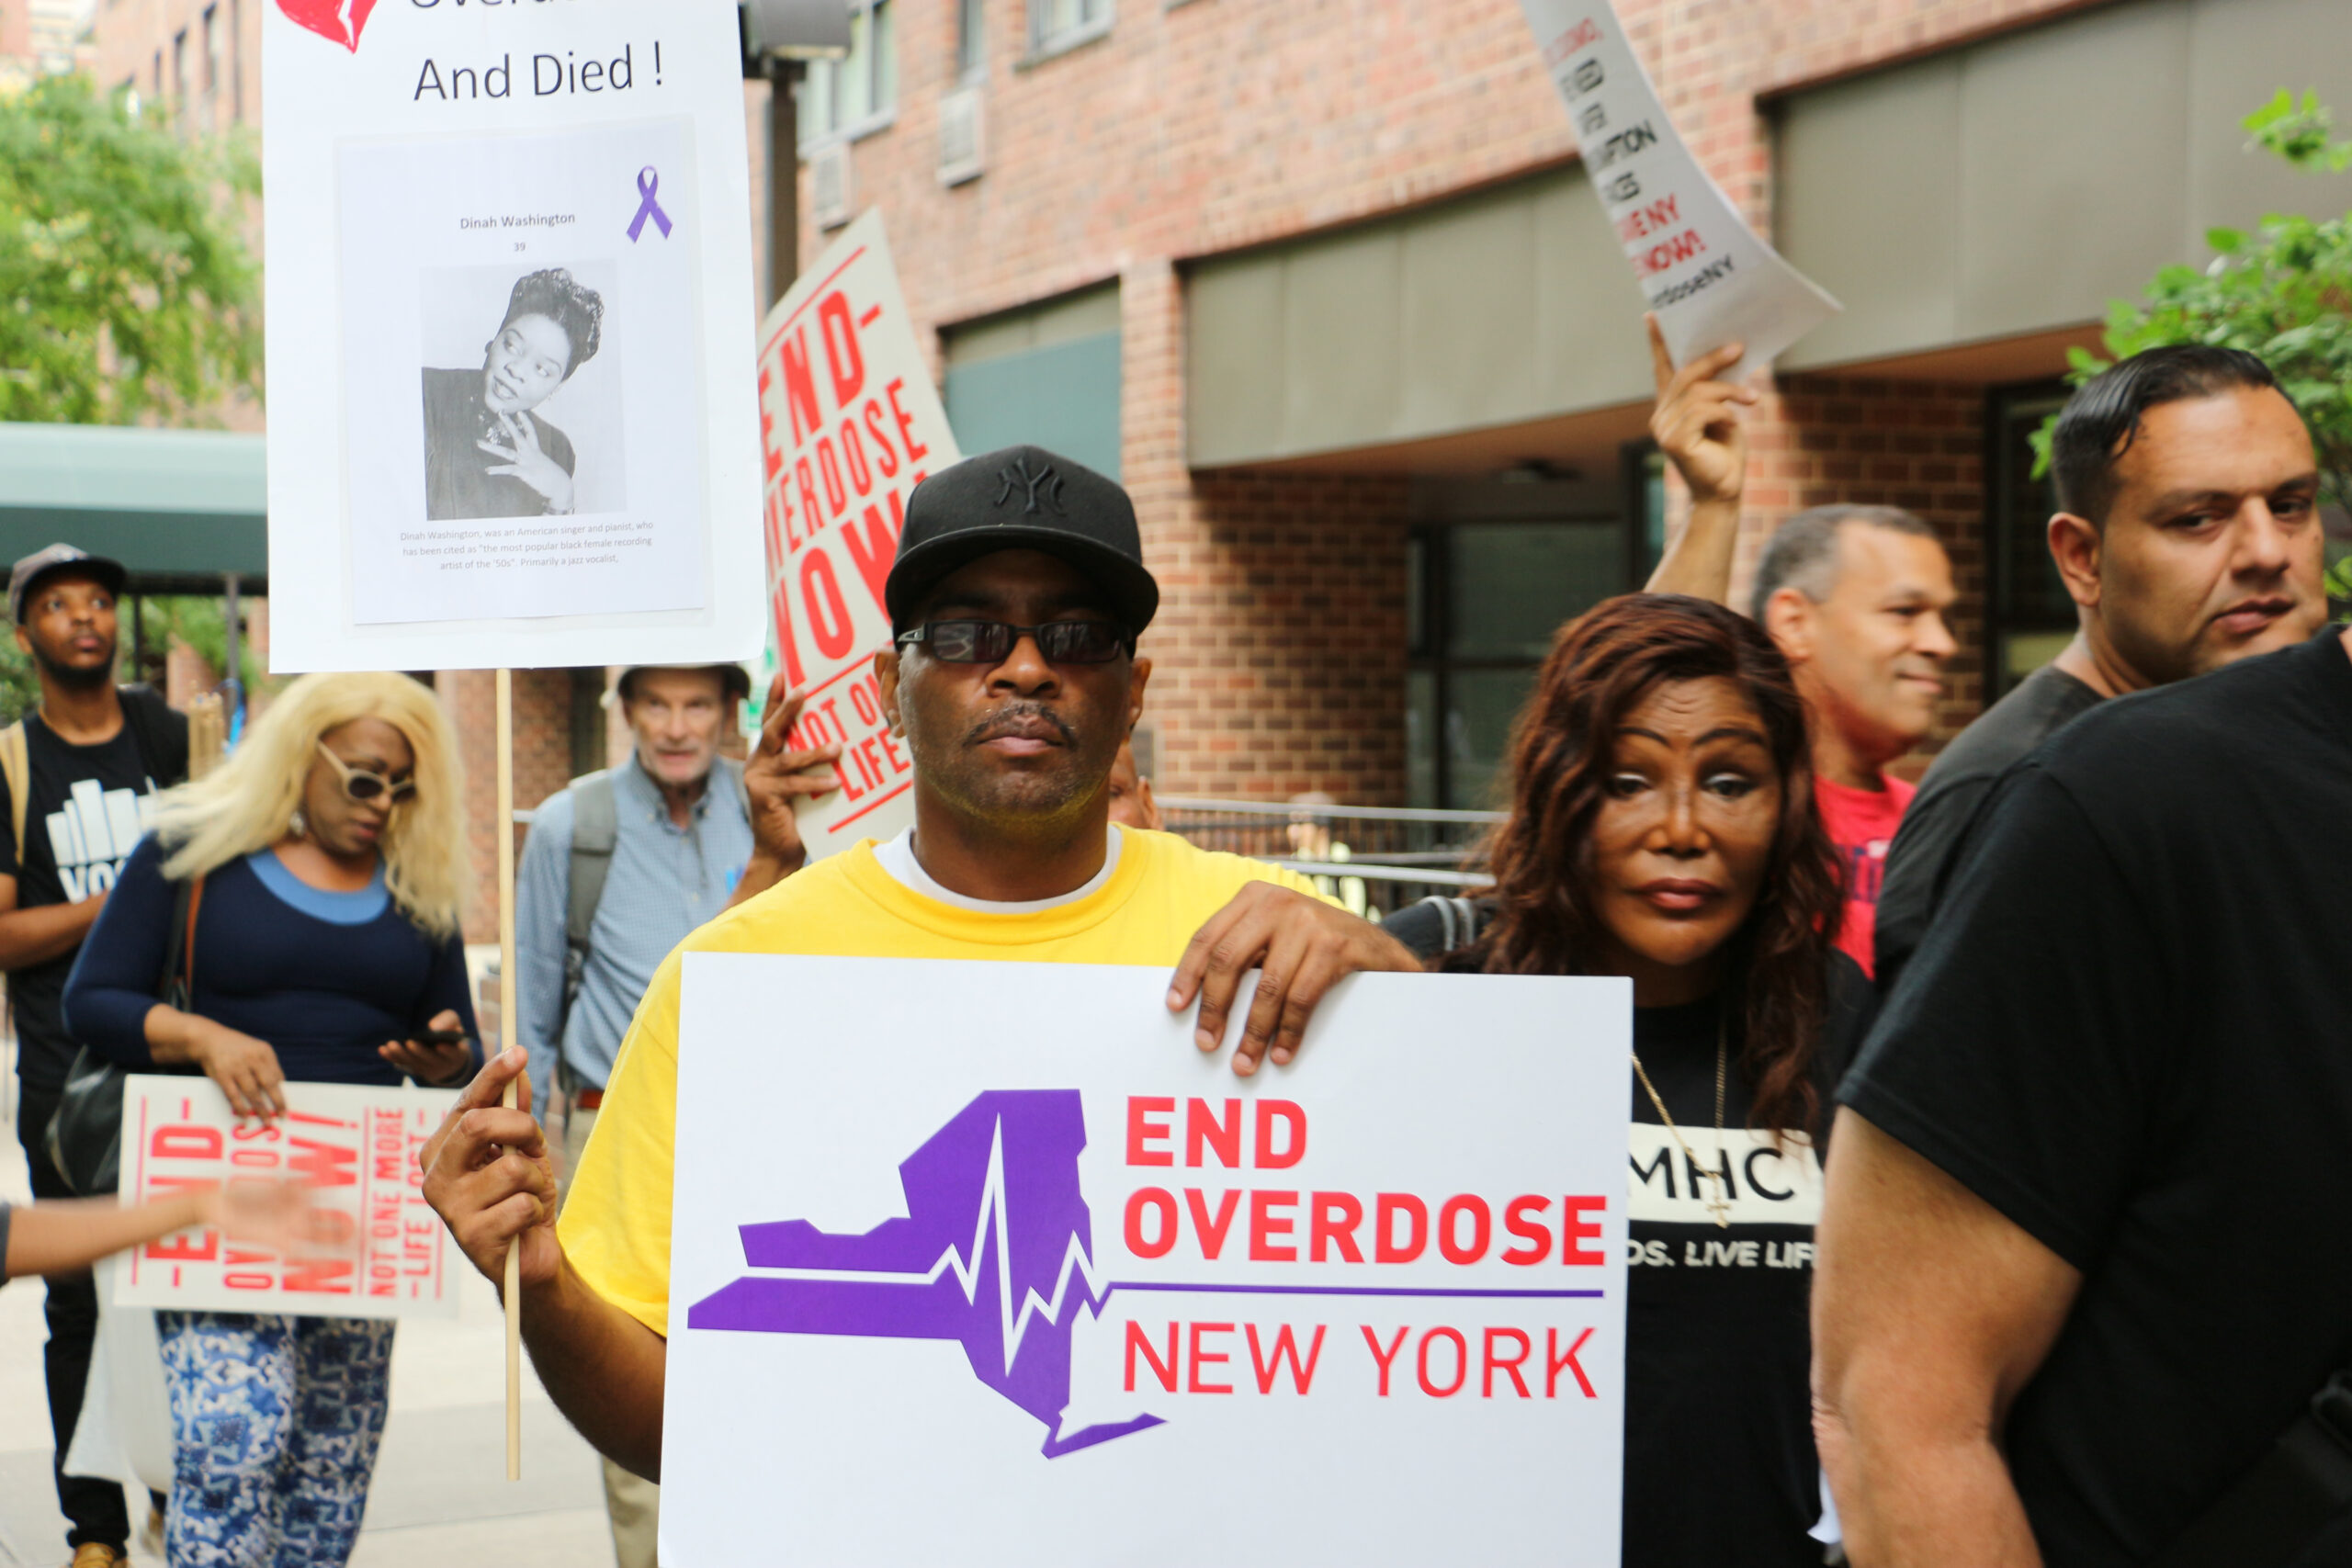 A group of people rallying for ending overdose in New York State.